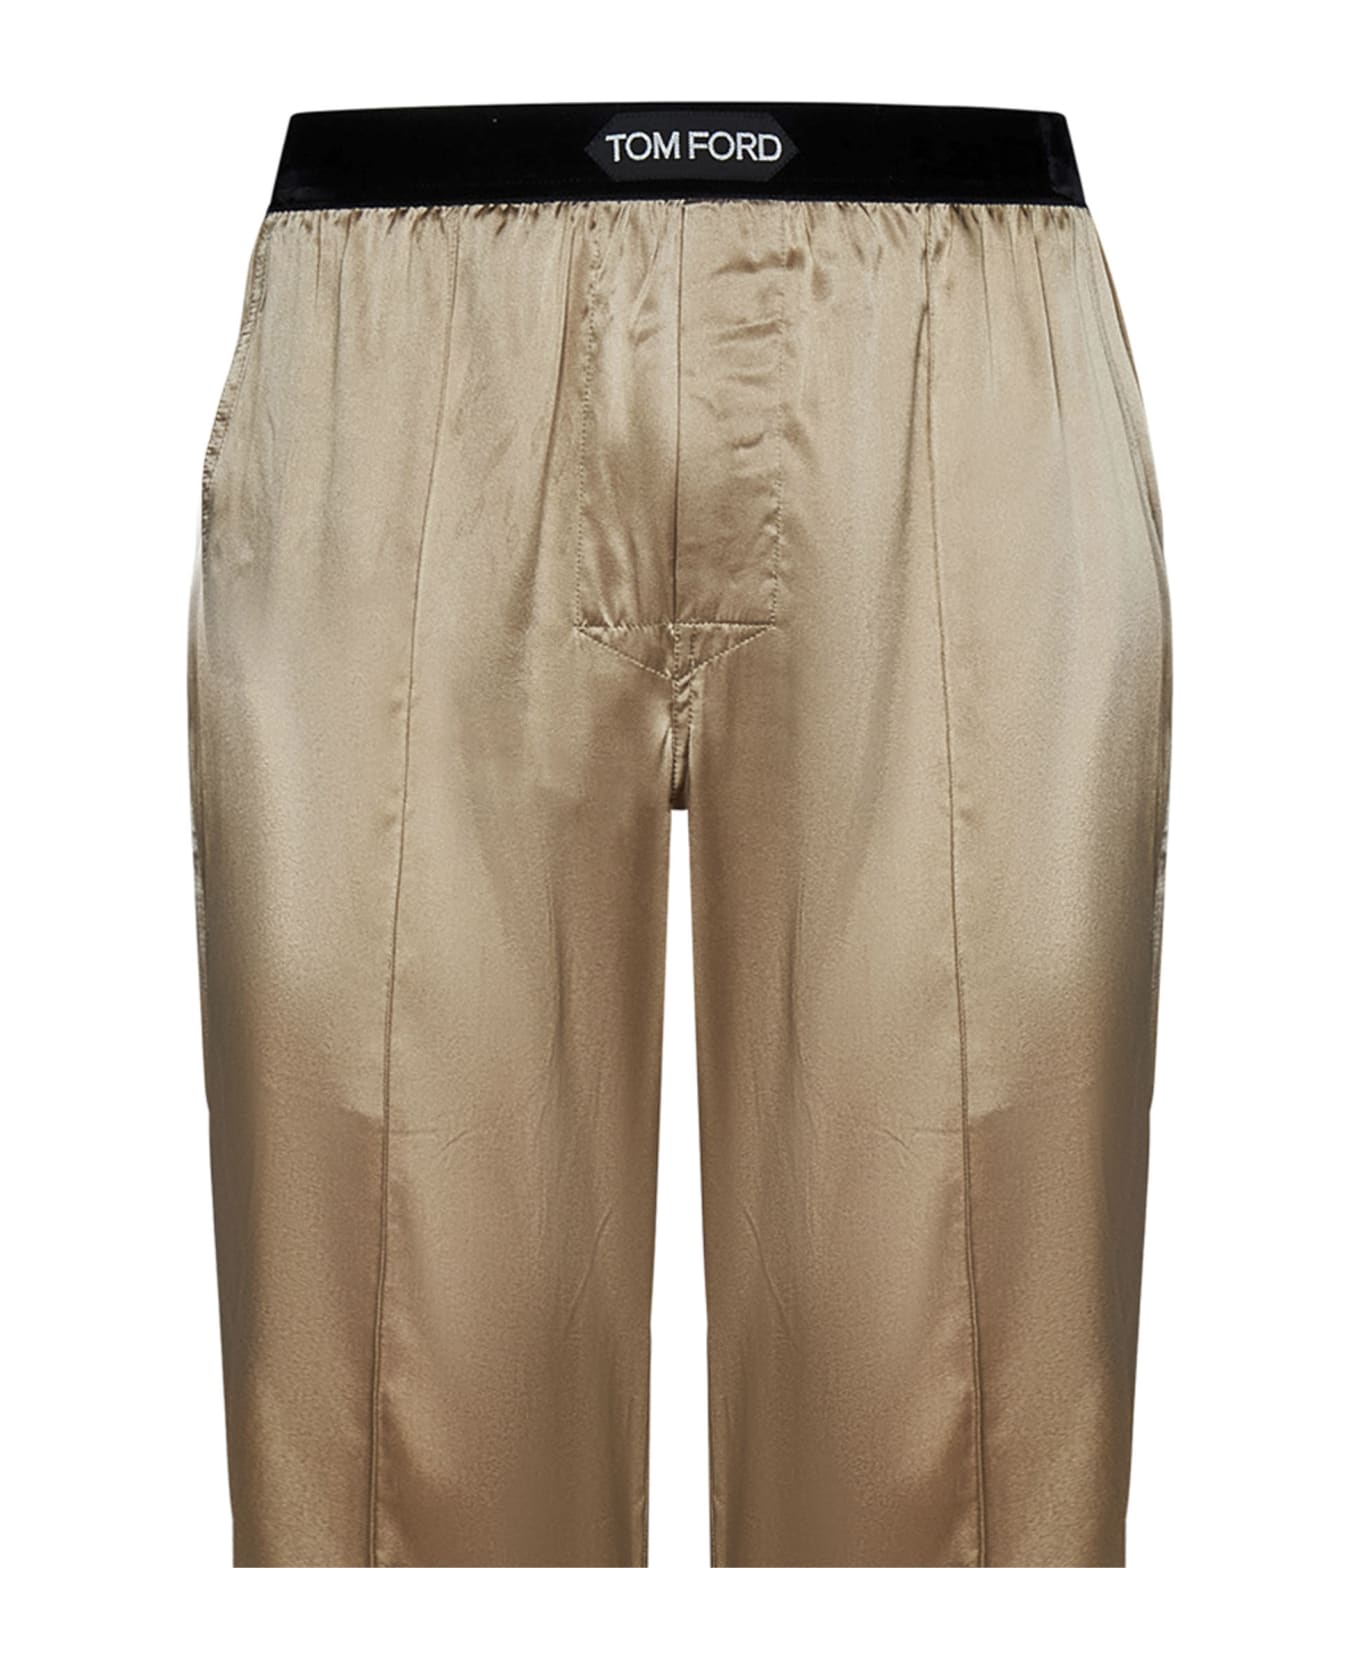 Tom Ford Trousers - nude